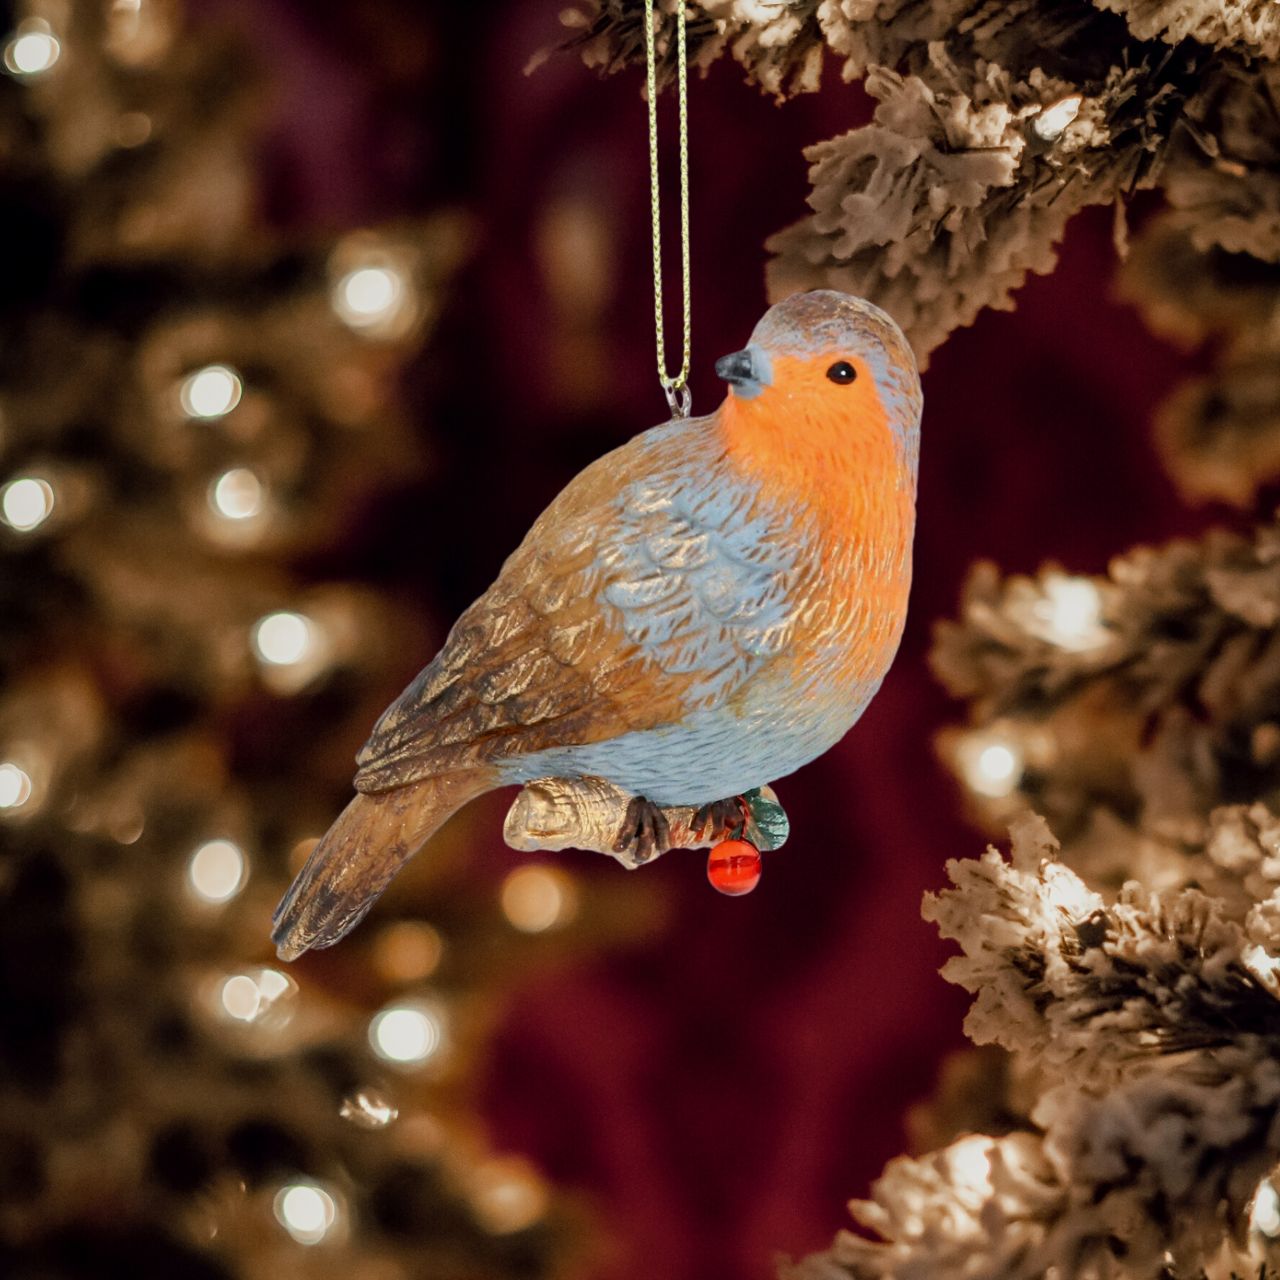 Gisela Graham Robin on Twig Christmas Hanging Ornament  Browse our beautiful range of luxury Christmas tree decorations, baubles & ornaments for your tree this Christmas.